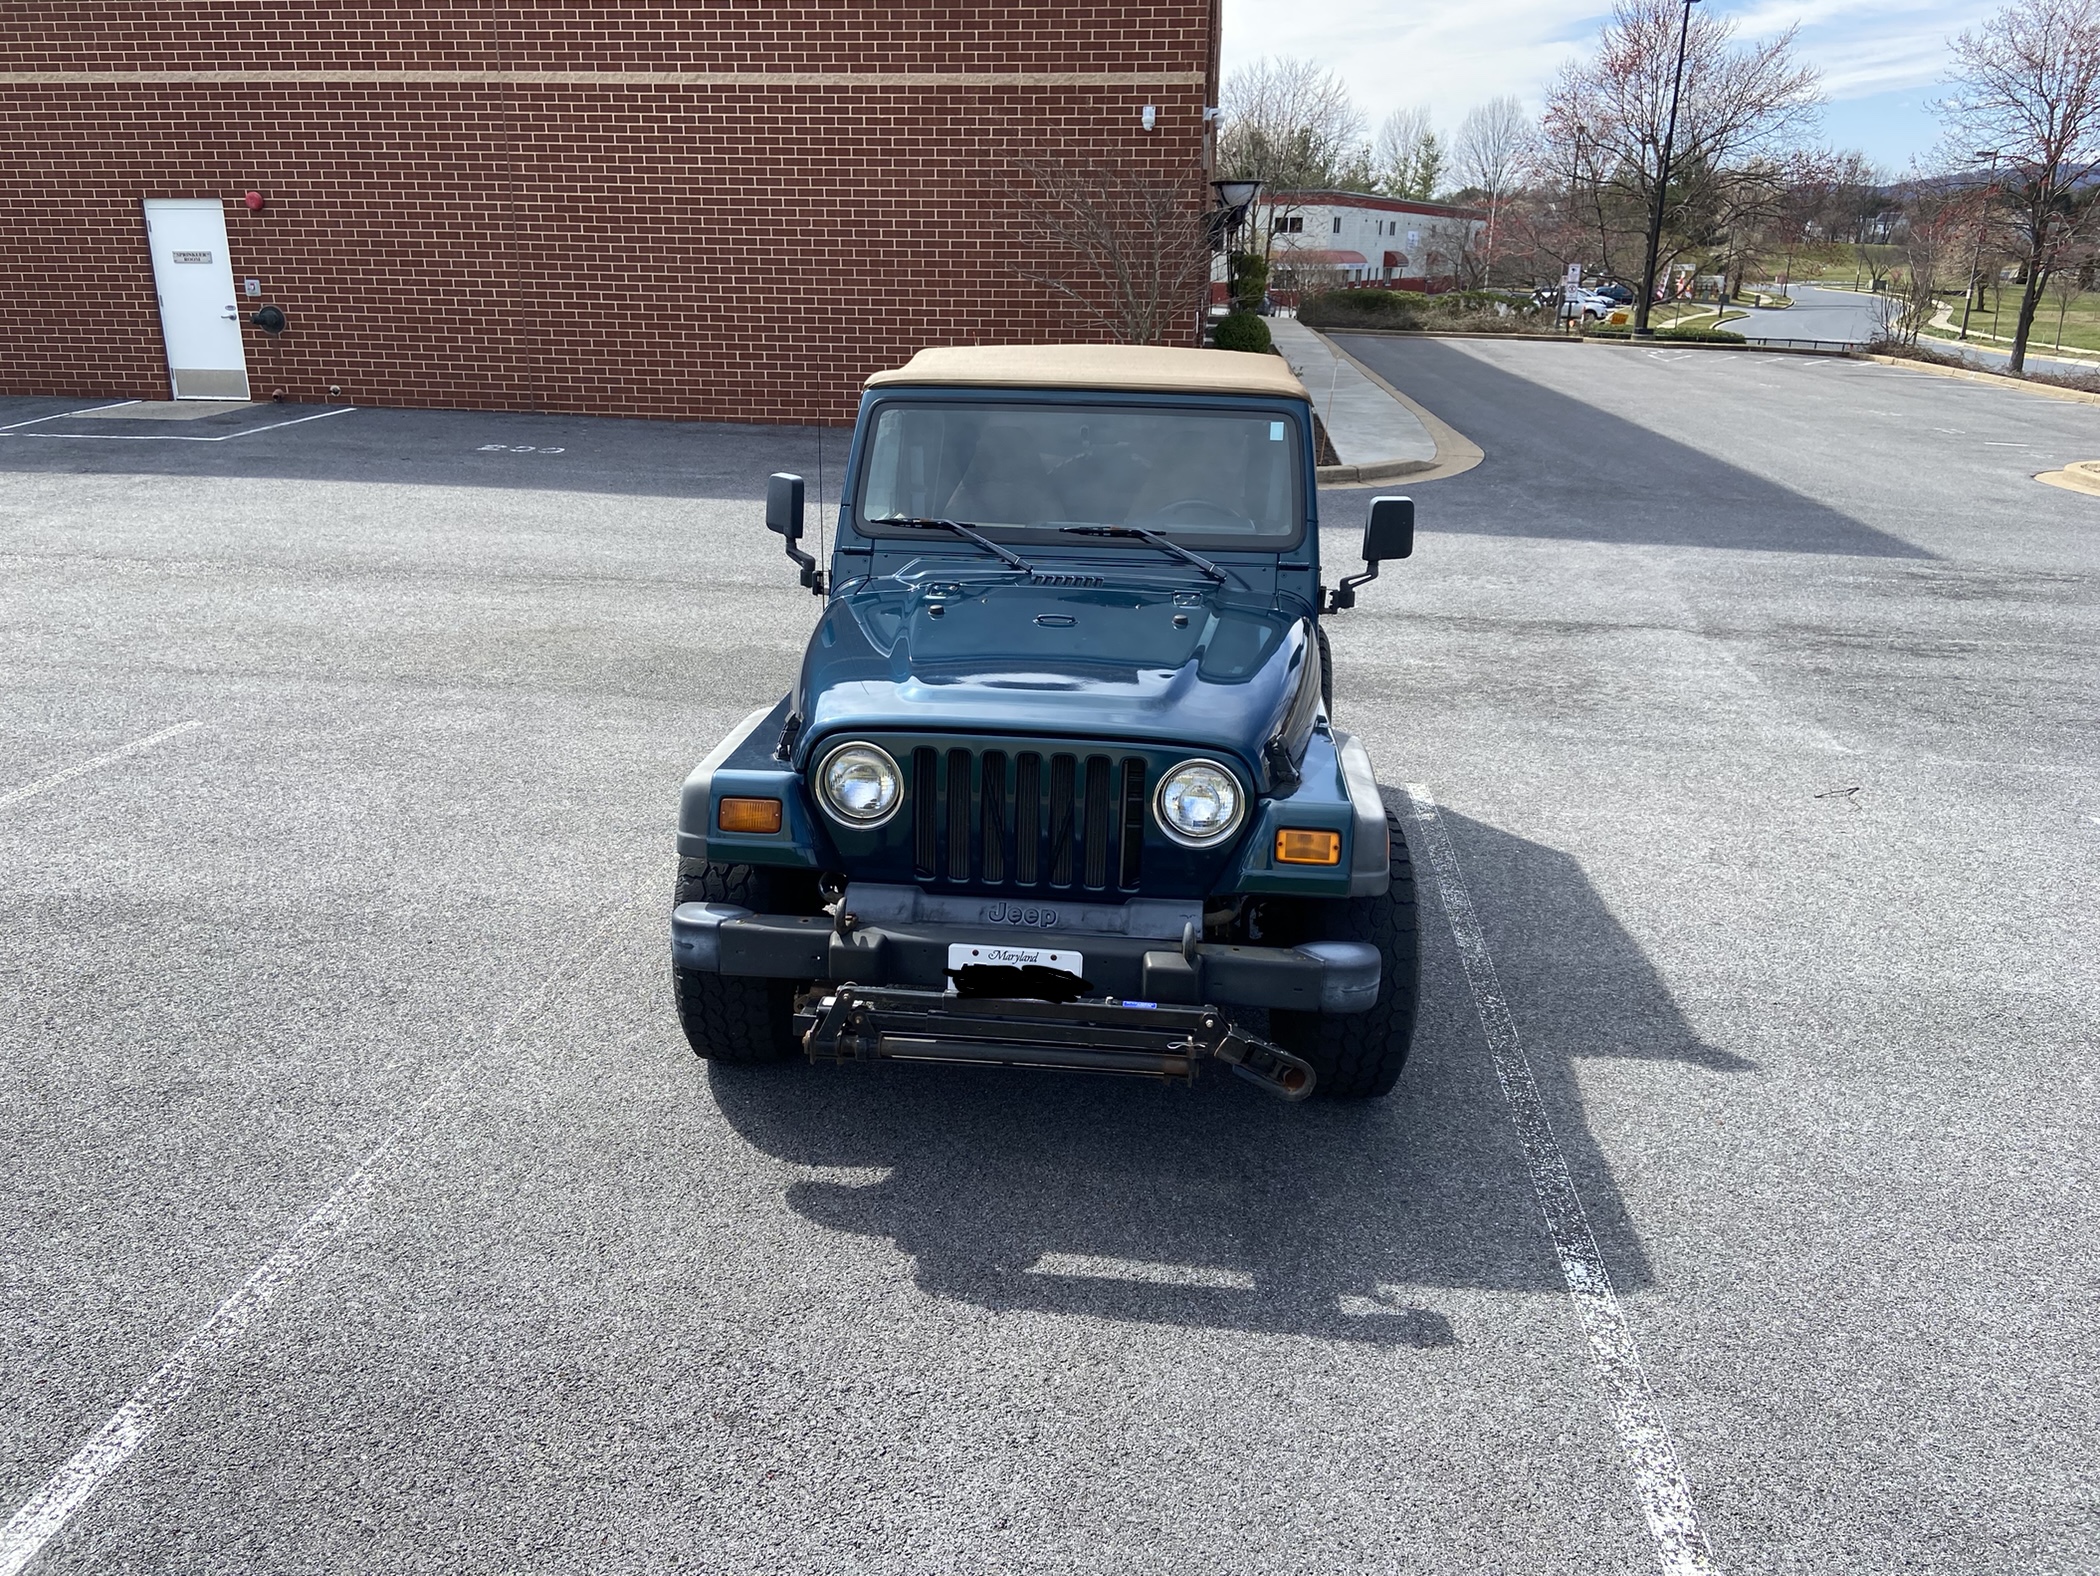 Jeep Wrangler for Sale Under $5,000 (Test Drive at Home) - Kelley Blue Book